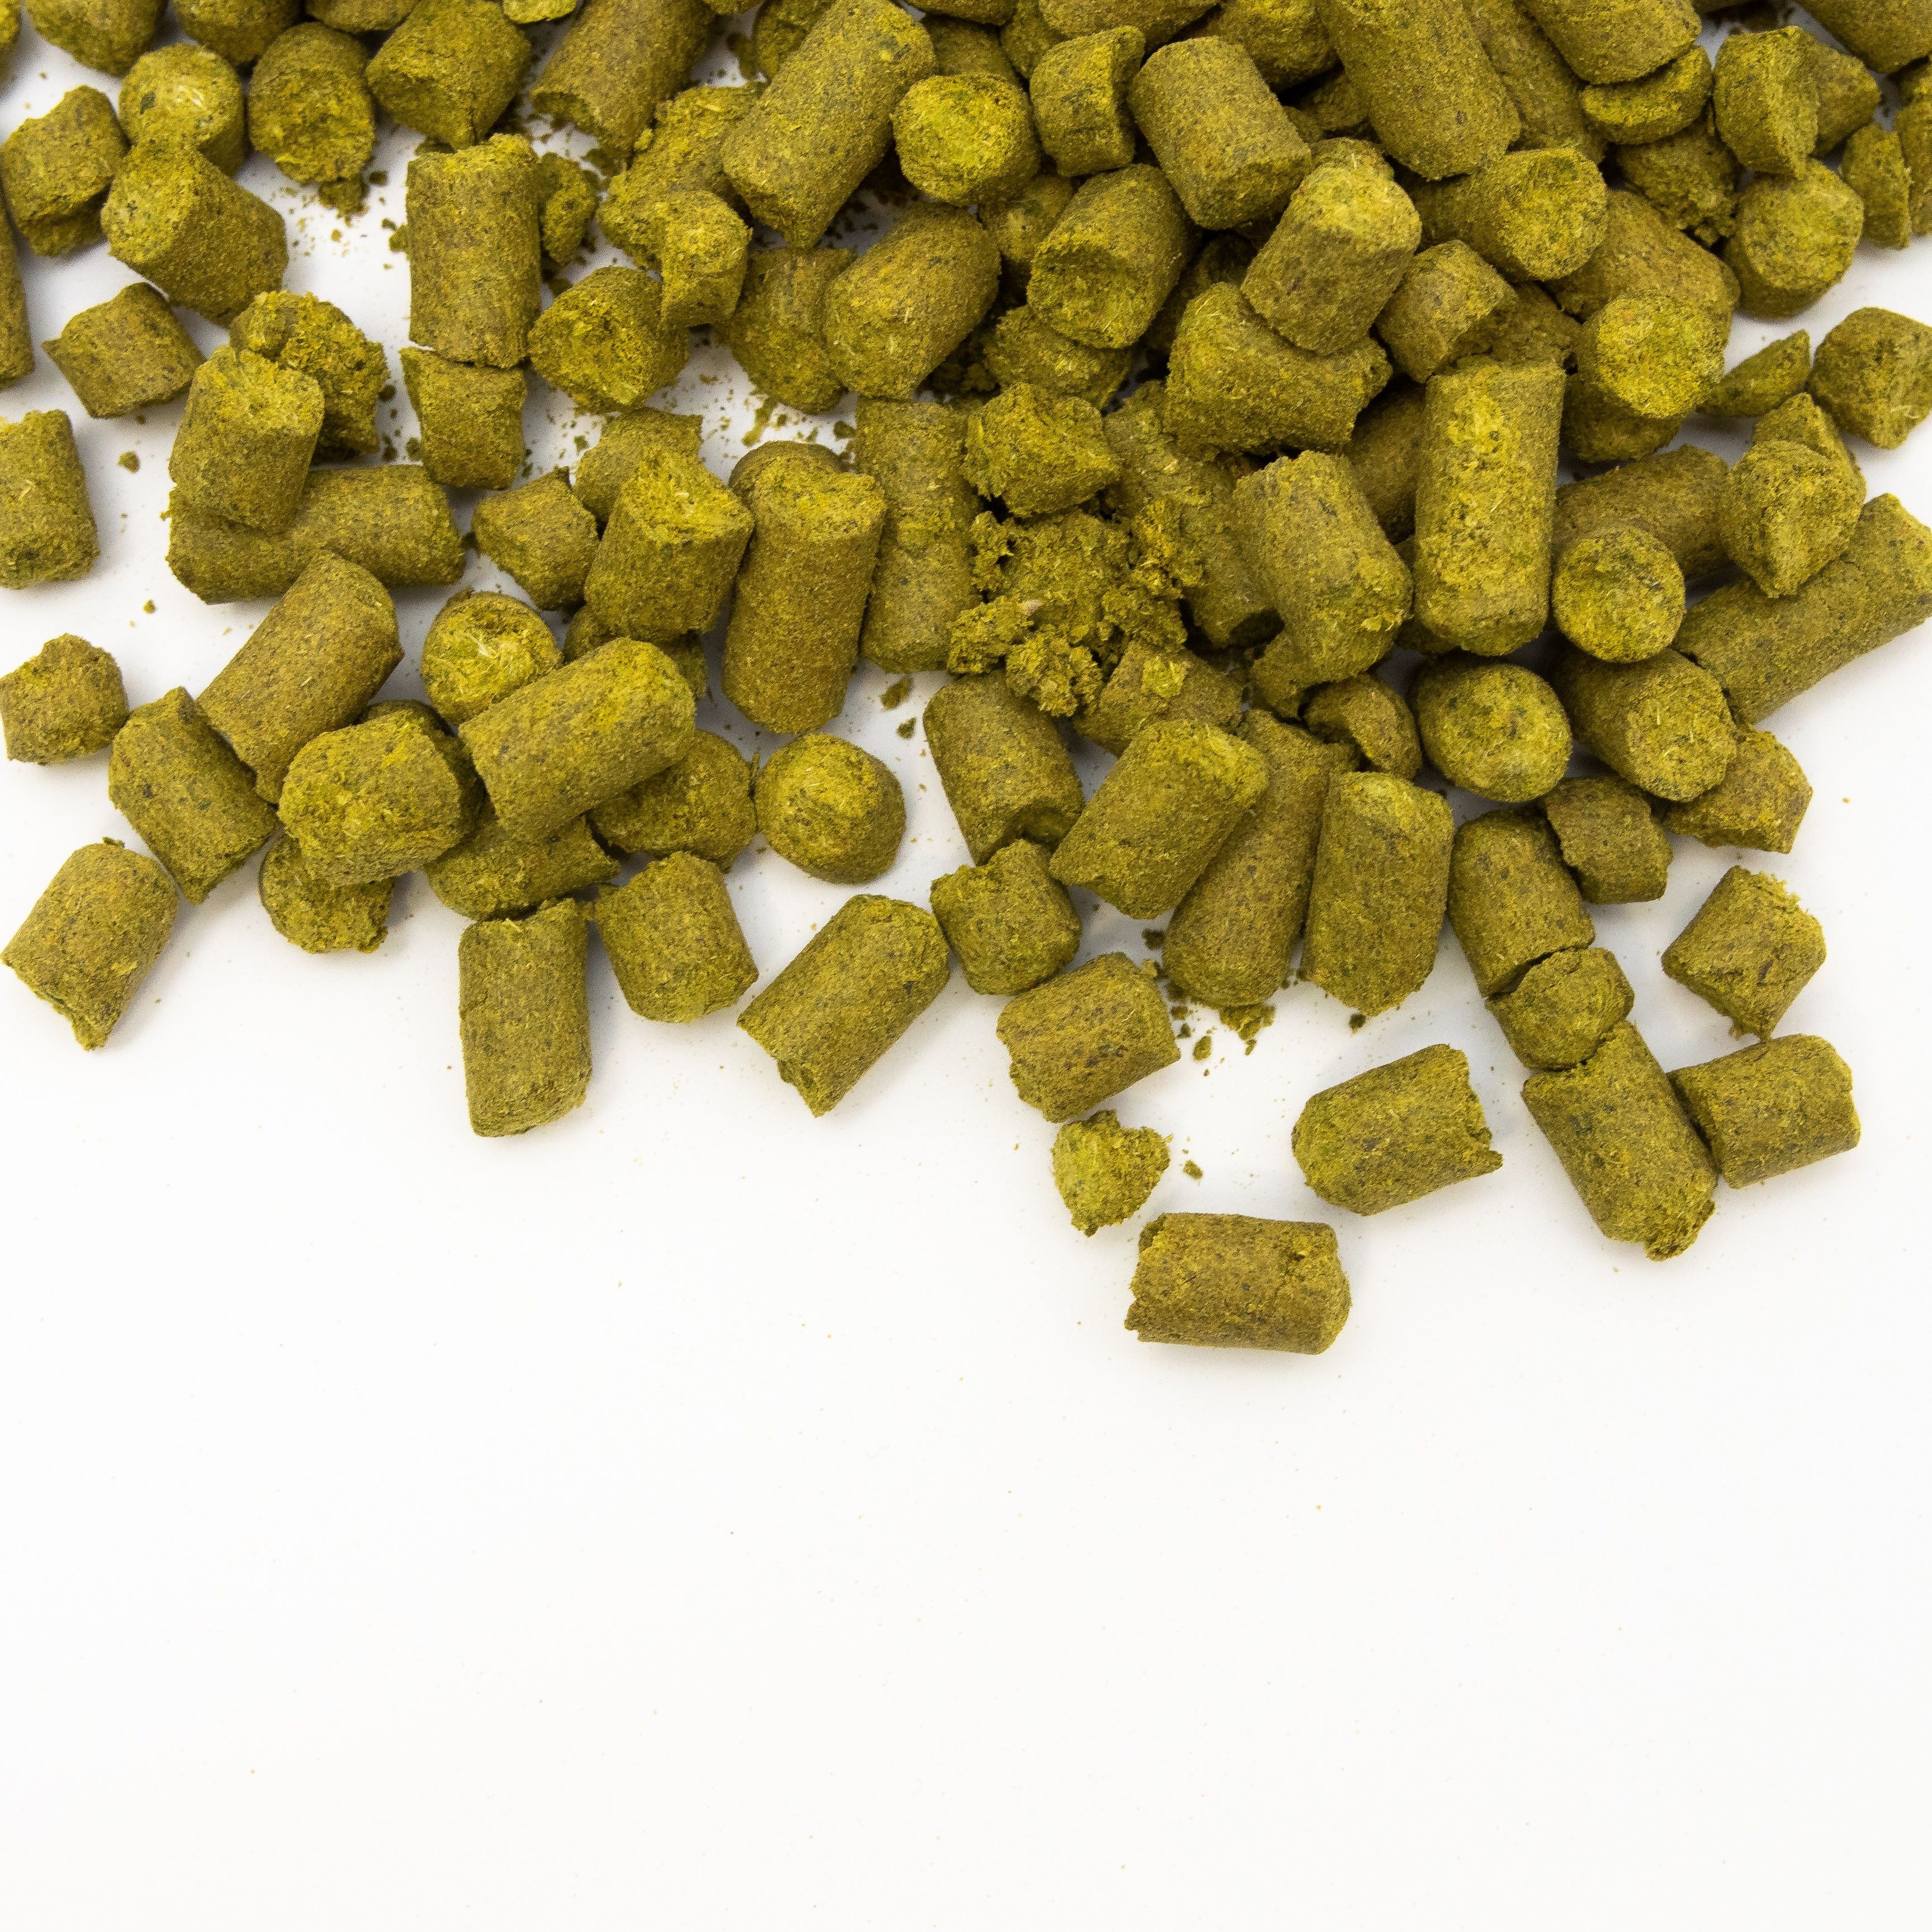 Using Near-Infrared Technology To Evaluate Hops